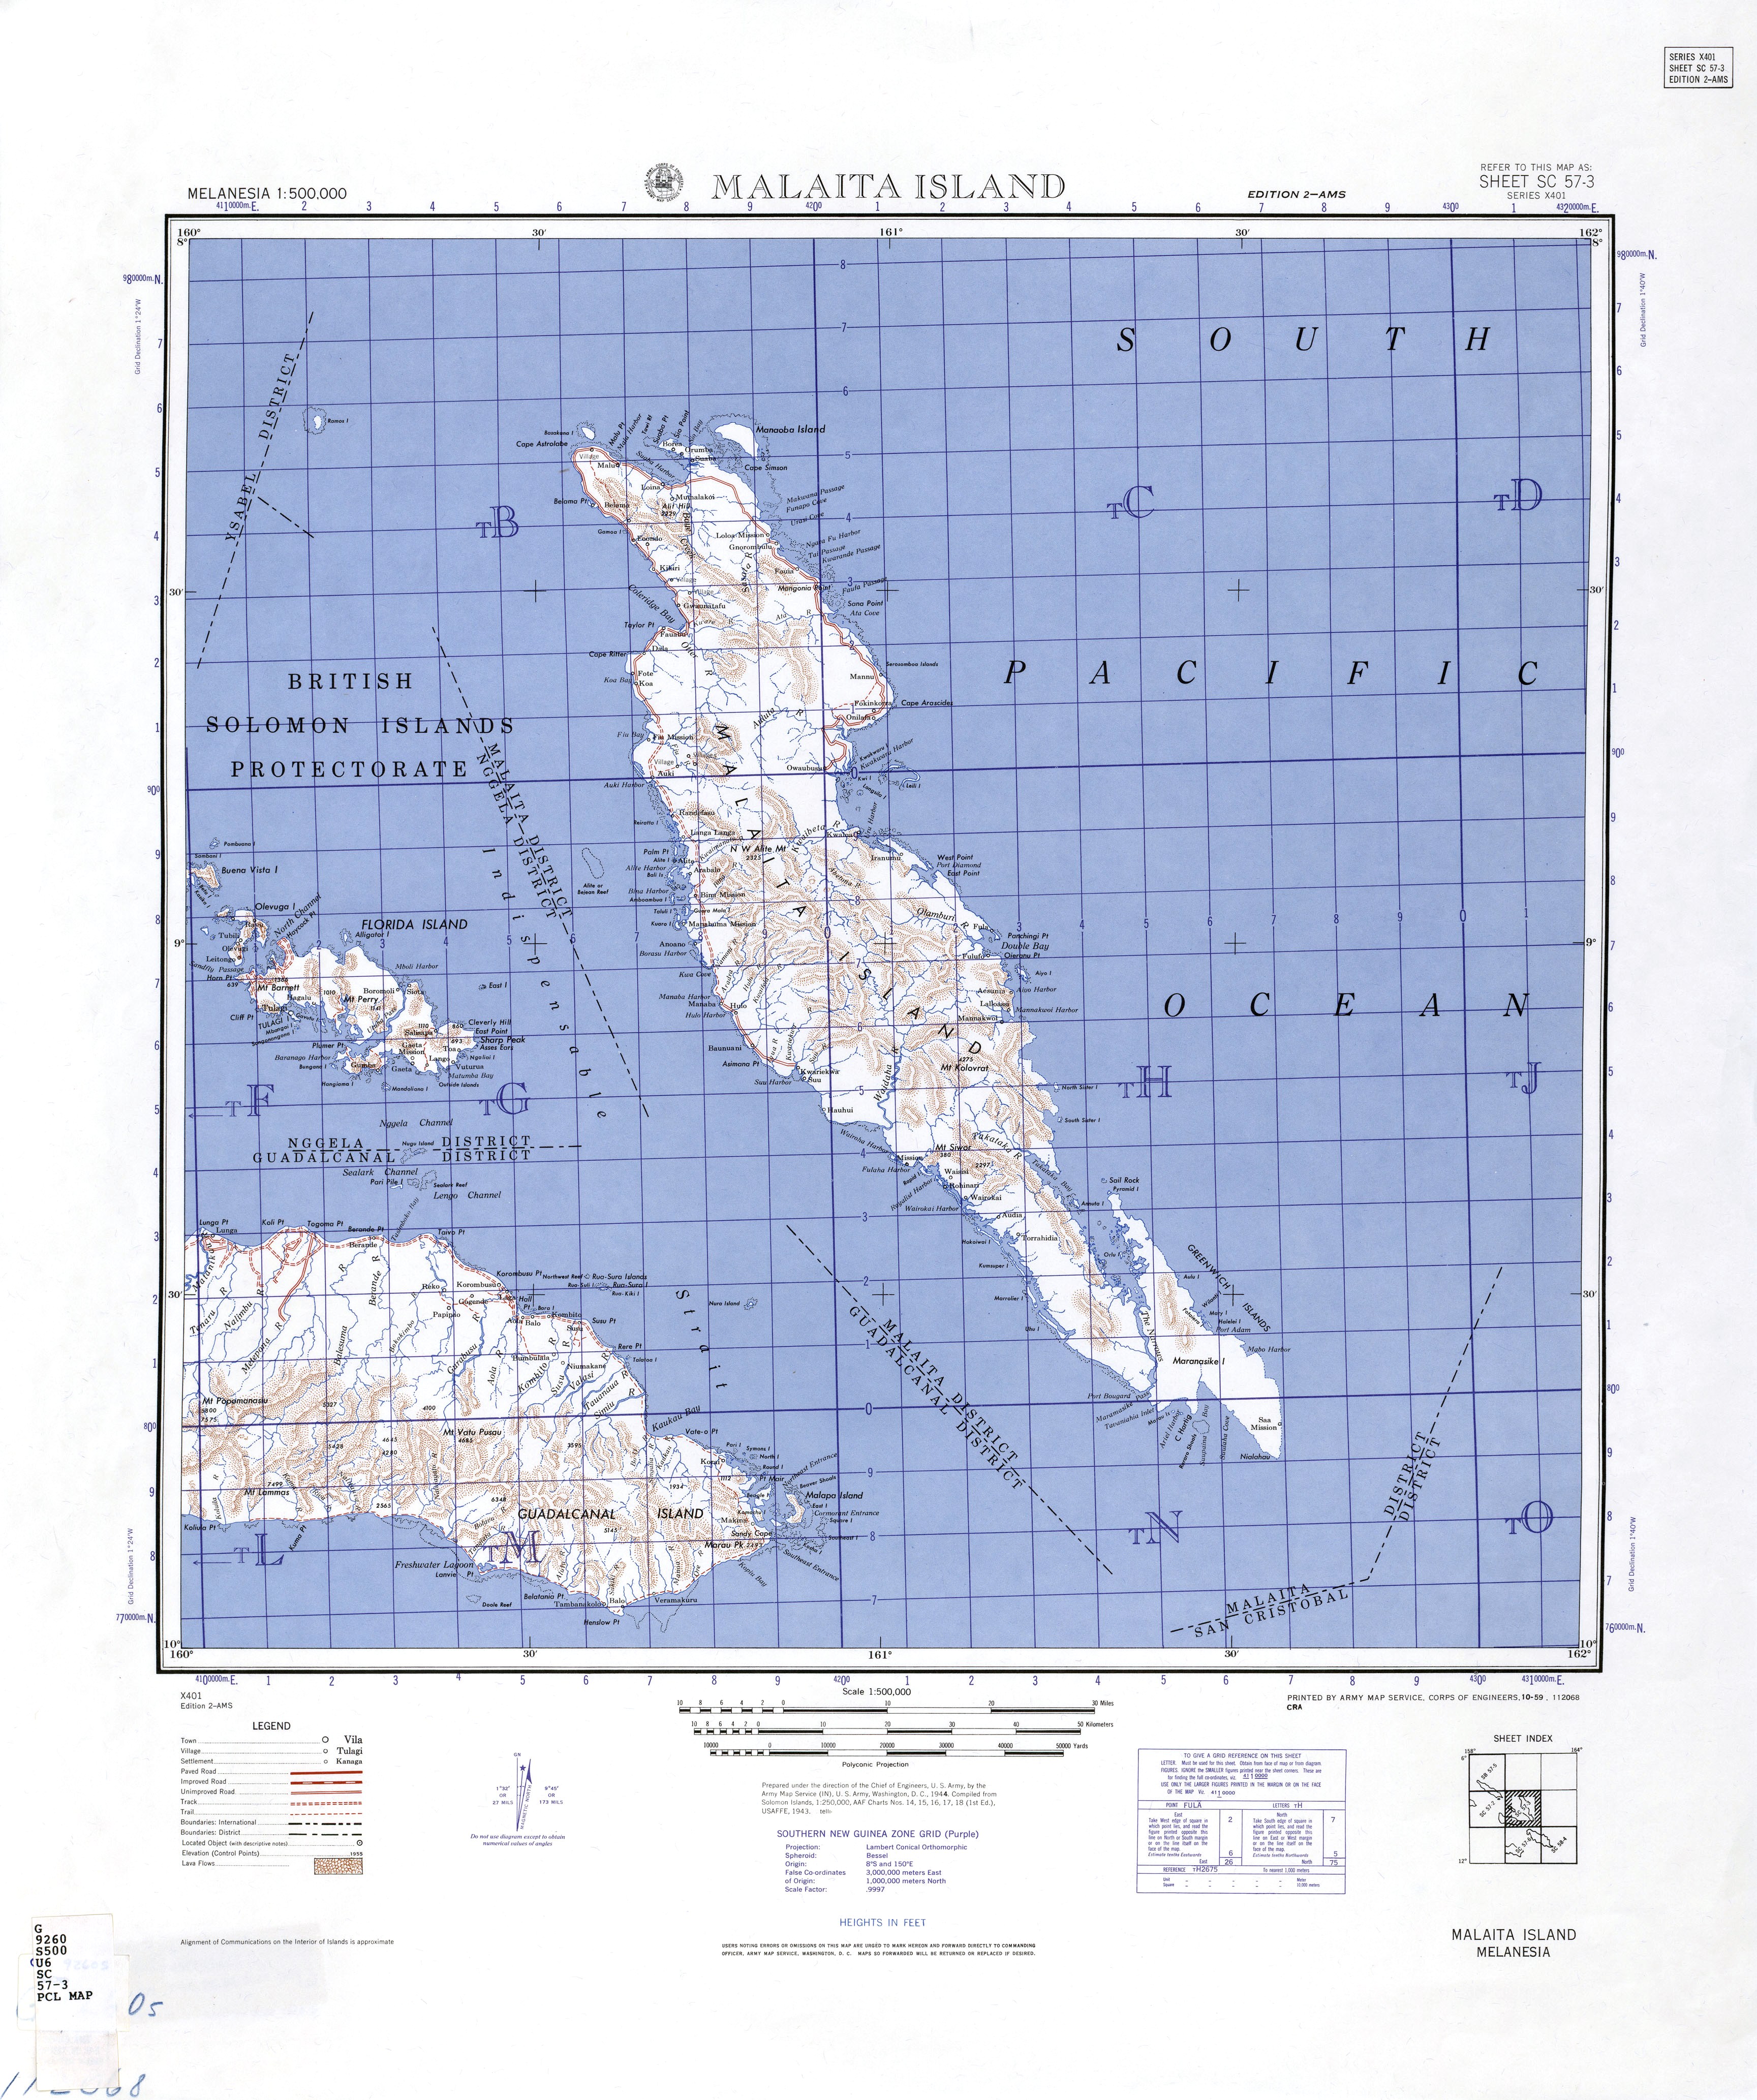 1944 United States Army map of Malaita Island and the eastern end of Guadalcanal in the Solomon Islands.